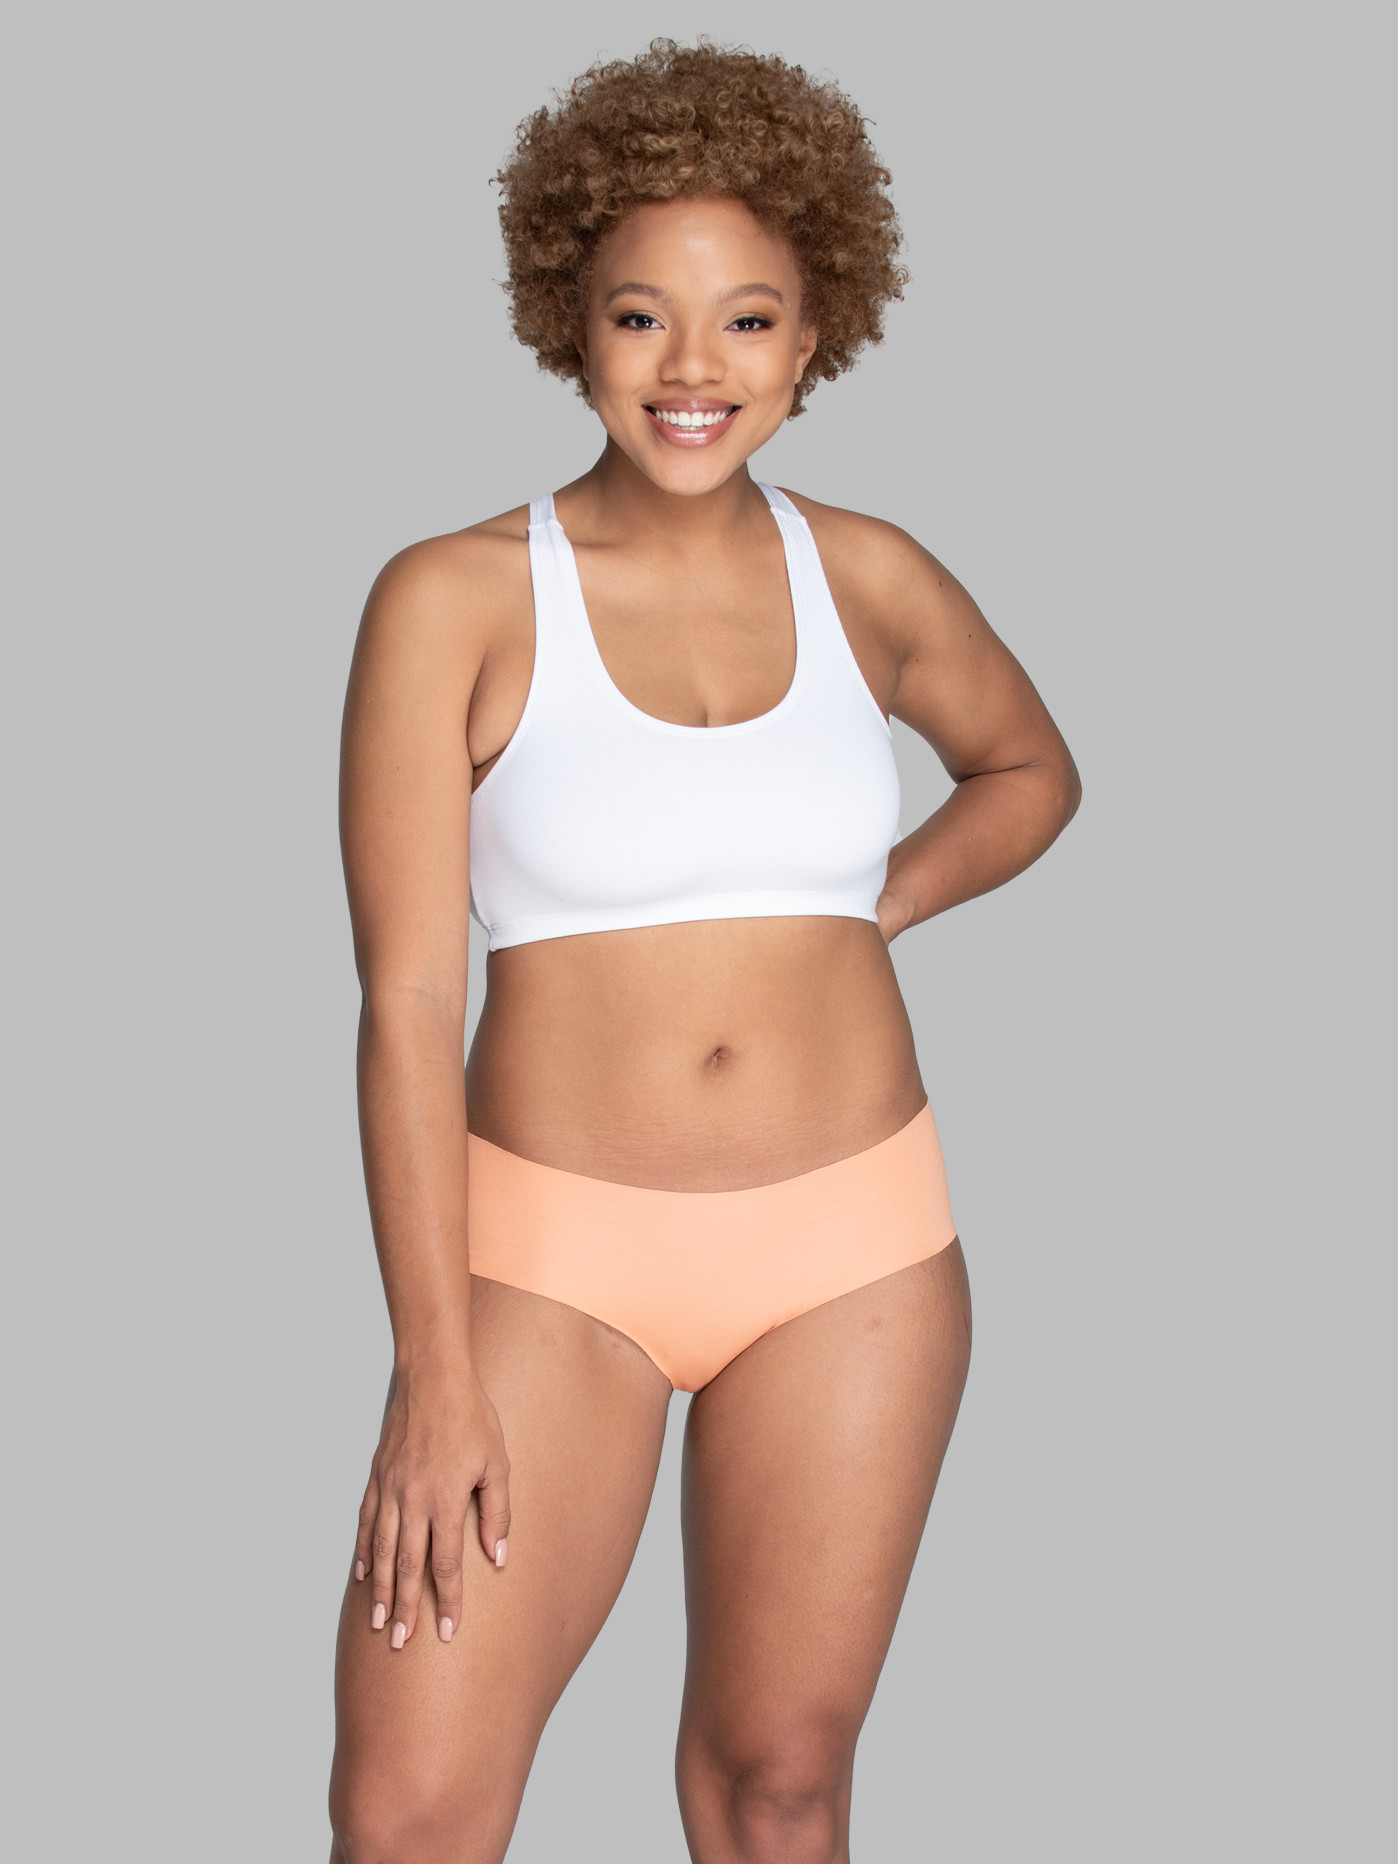 Neione No Show Women's Cotton Underwear Seamless Hipster Panties with No  Panty Lines - Coupon Codes, Promo Codes, Daily Deals, Save Money Today